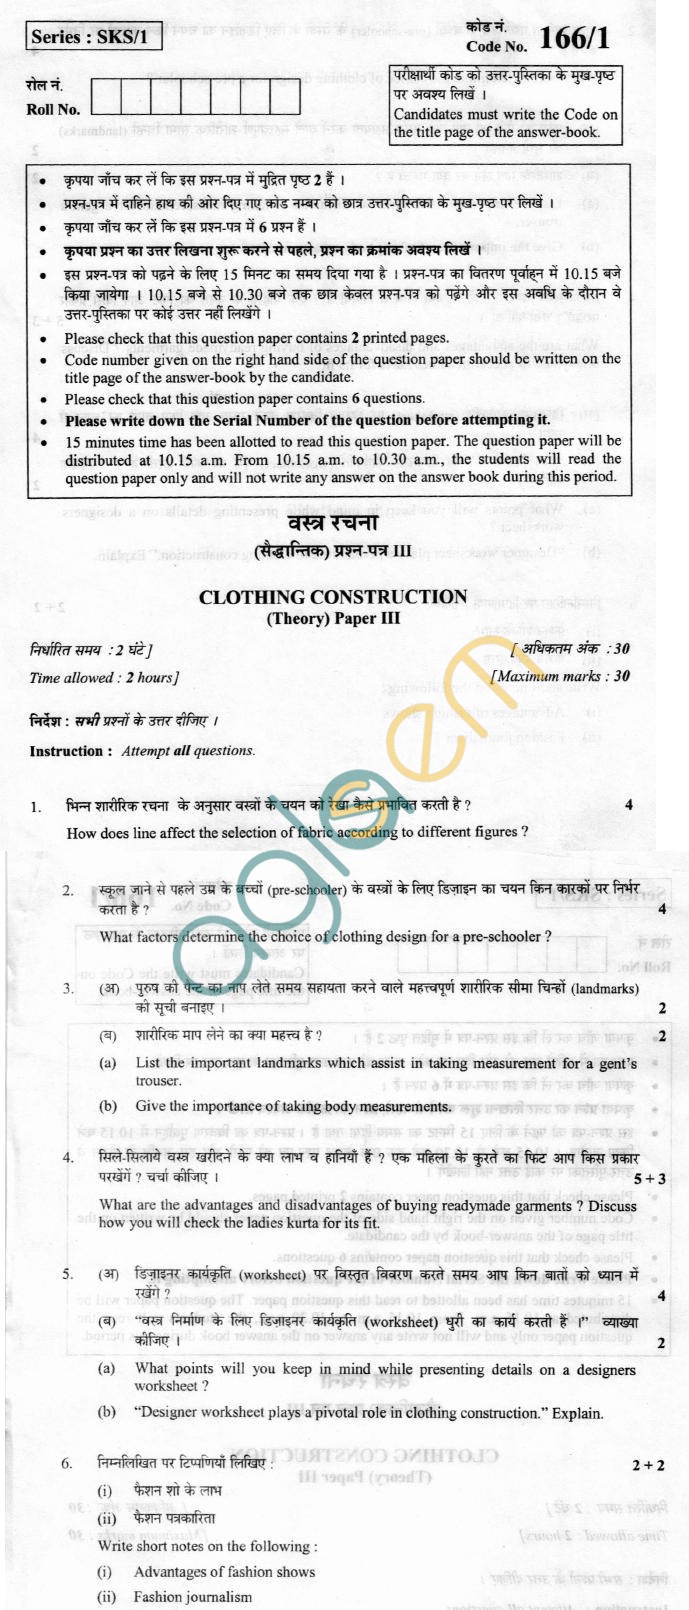 CBSE Board Exam 2013 Class XII Question Paper - Clothing Construction PaperIII